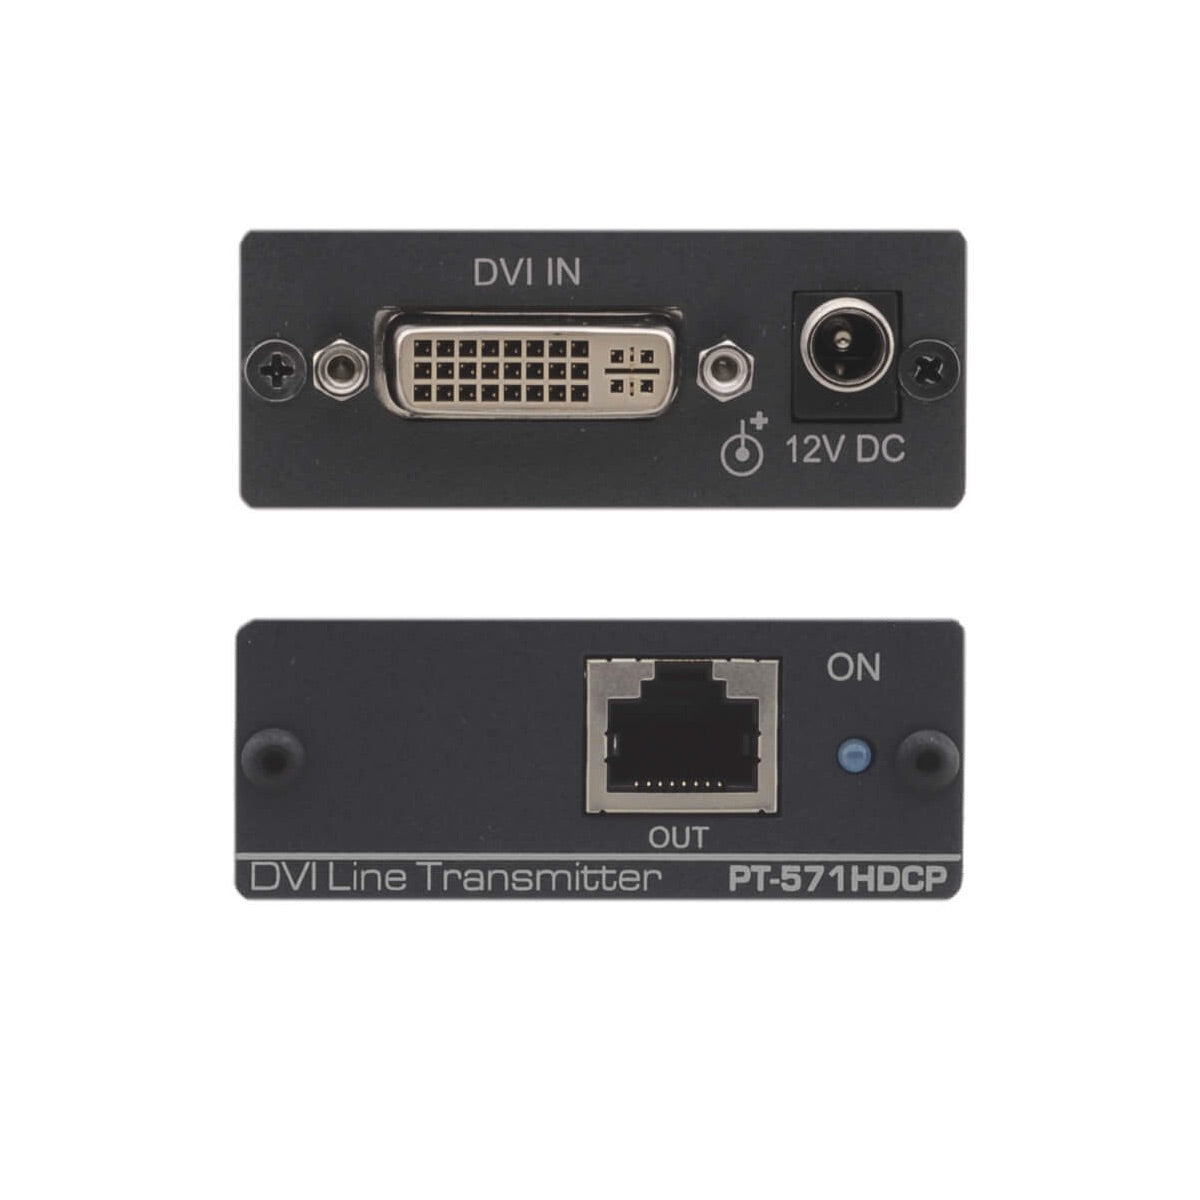 Kramer PT-571HDCP - DVI (HDCP) over Twisted Pair Transmitter, front and rear views